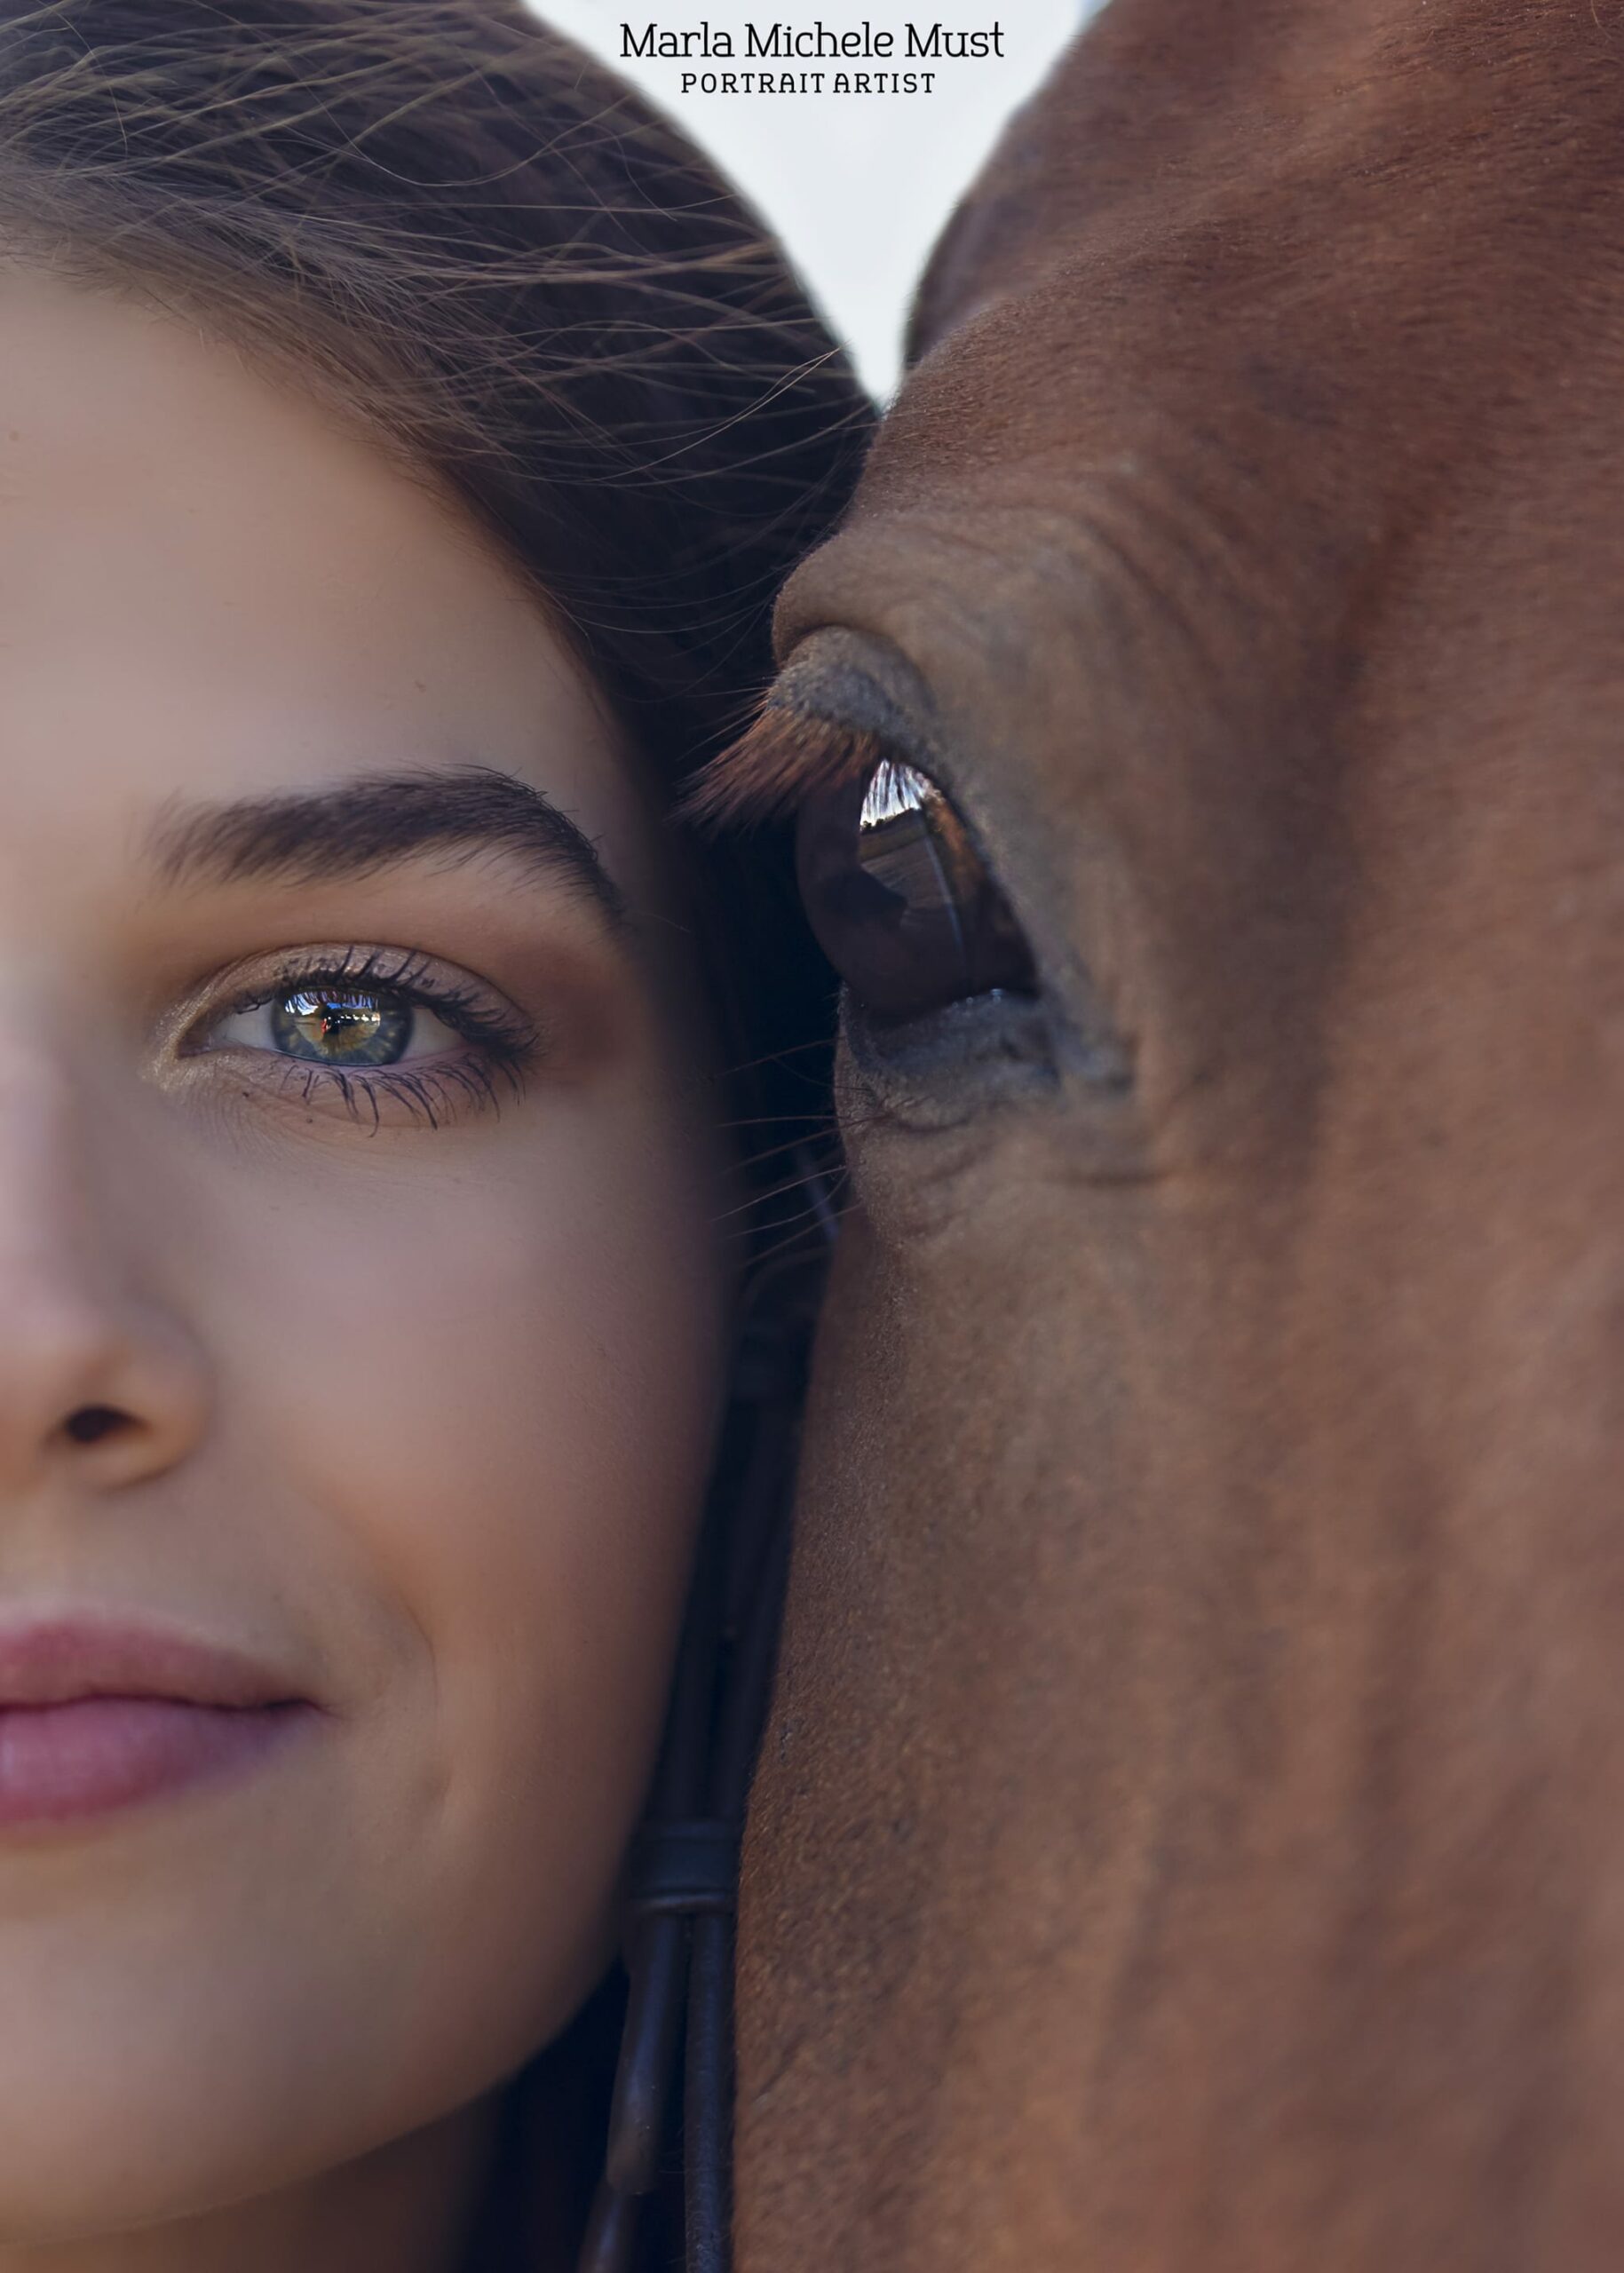 Detroit equine photographer's capture: Horse owner's intimate connection captured in a close-up portrait of a woman and her horse as she smiles to the camera, only hers the horse's eye in view.